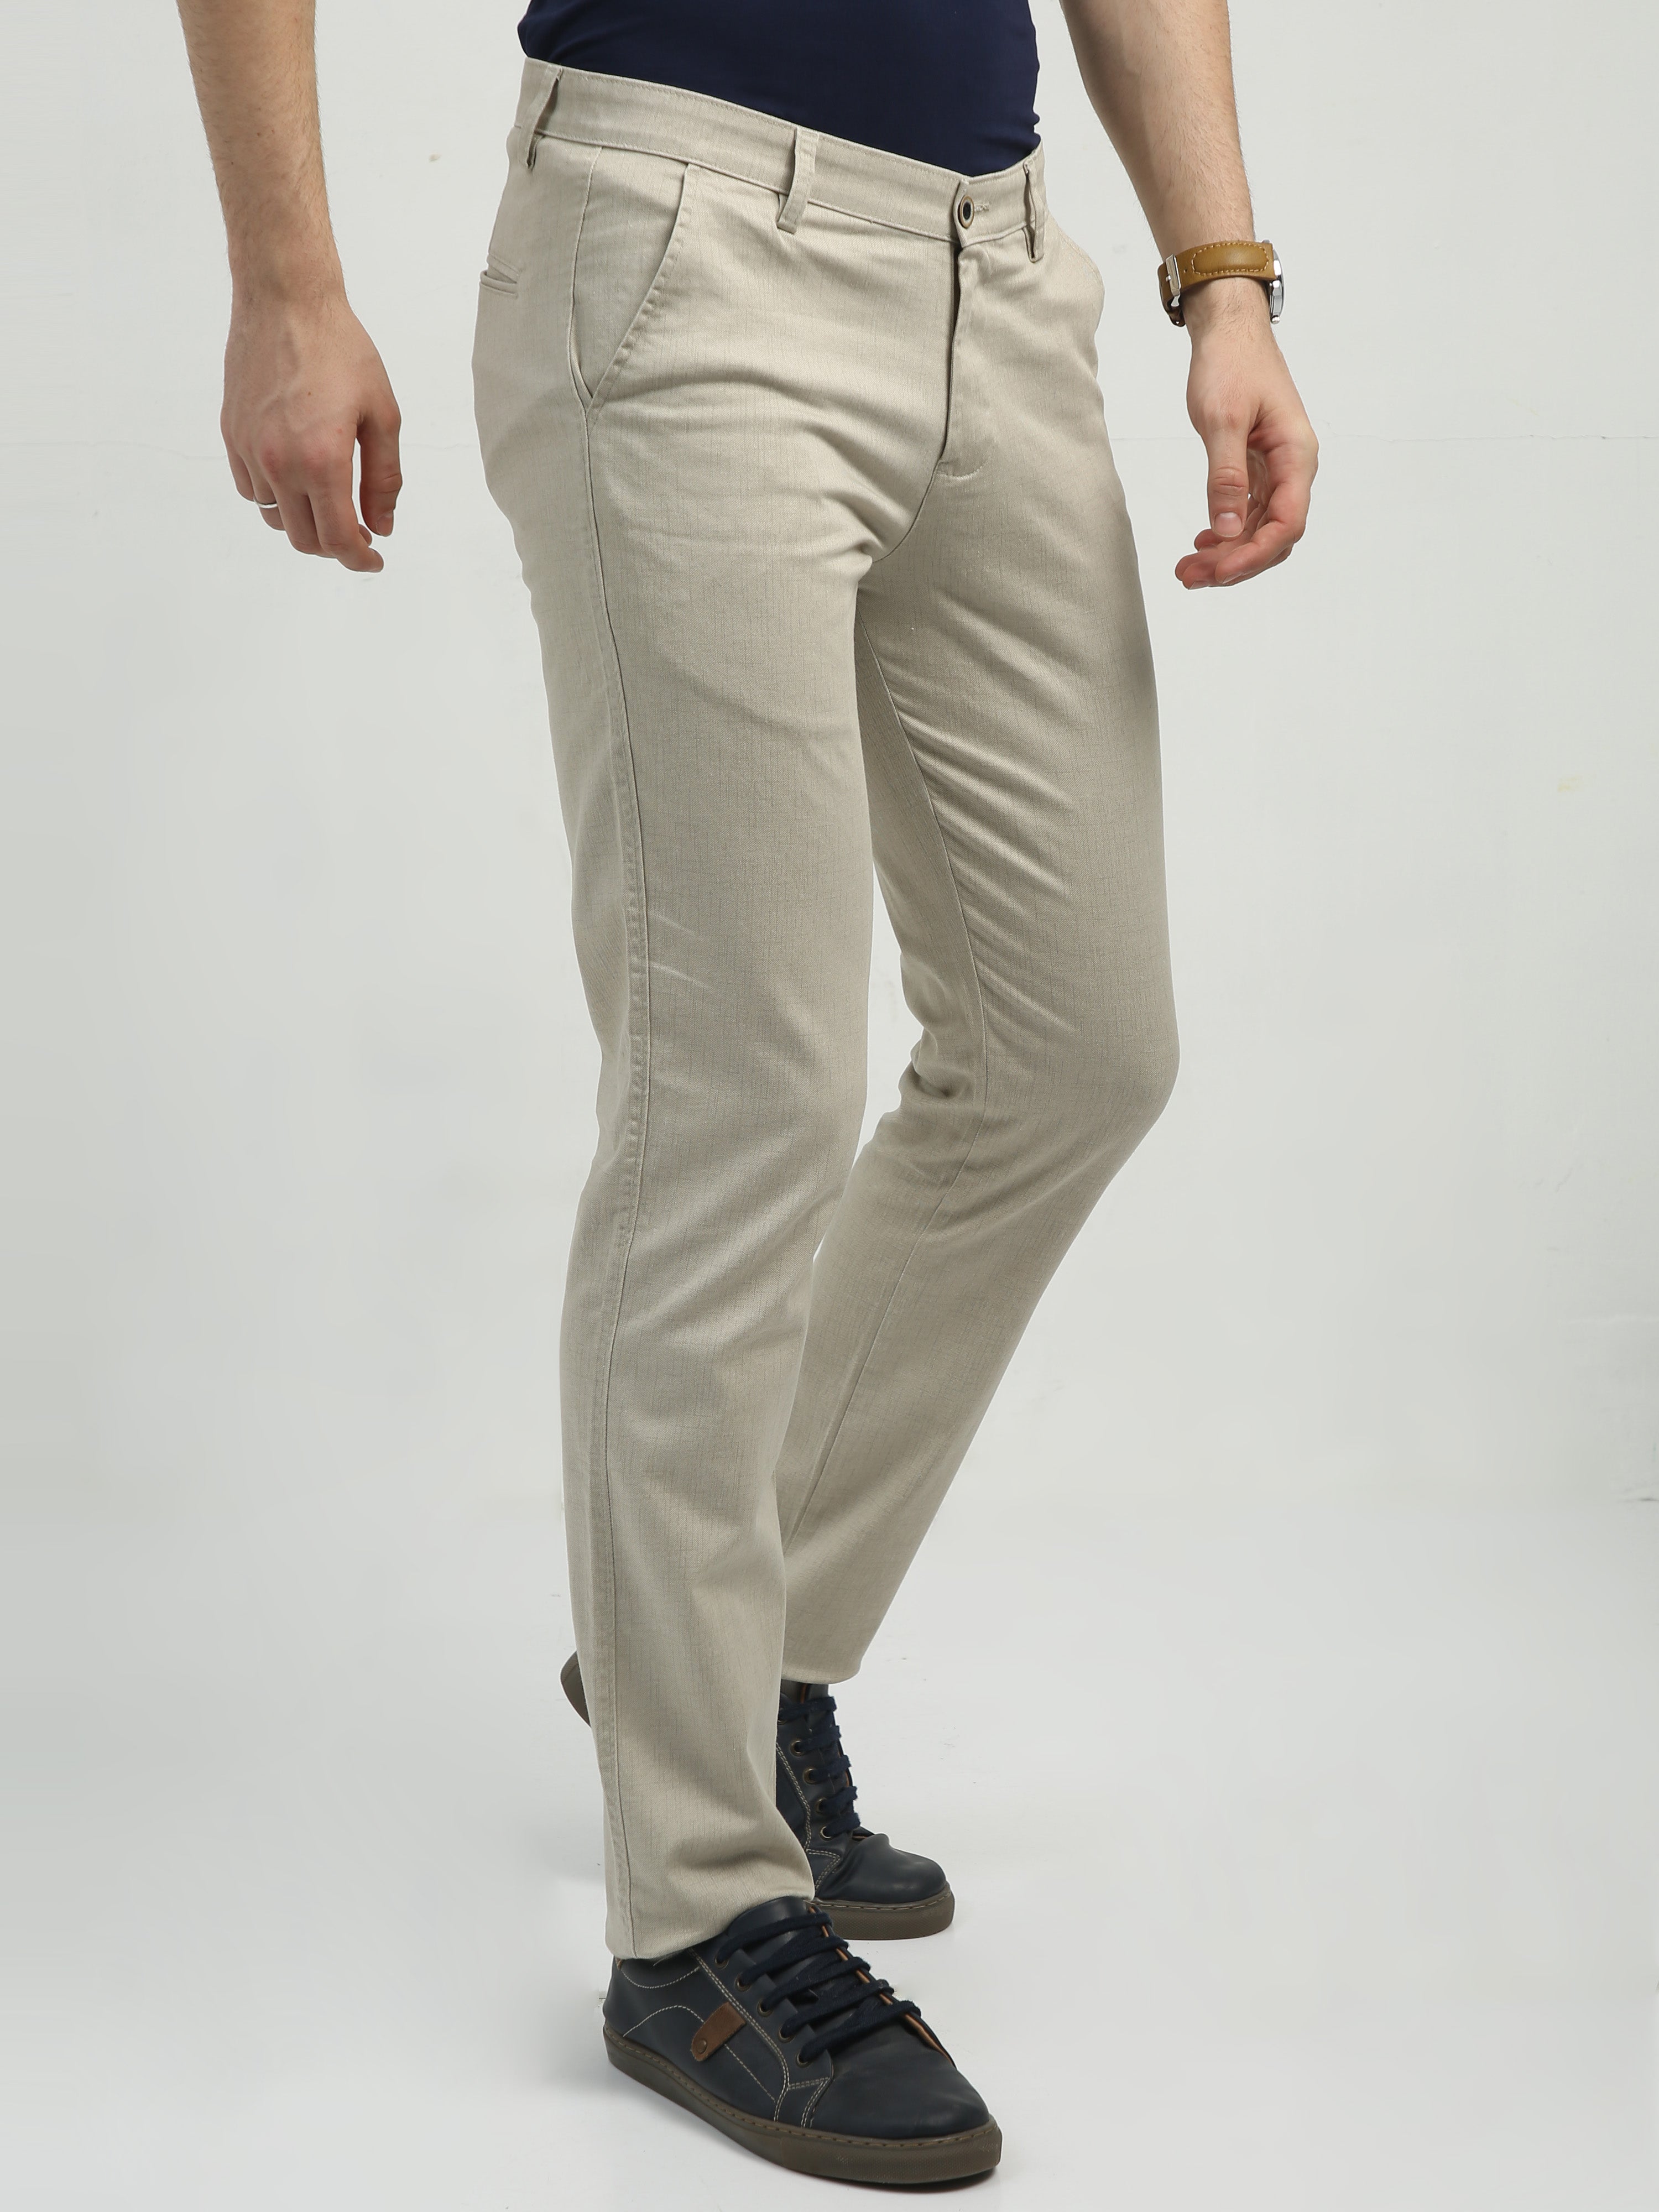 Classic Polo Men's   Chiseled Fit Cotton Trousers | TBO2-30 C-BEG-CF-LY